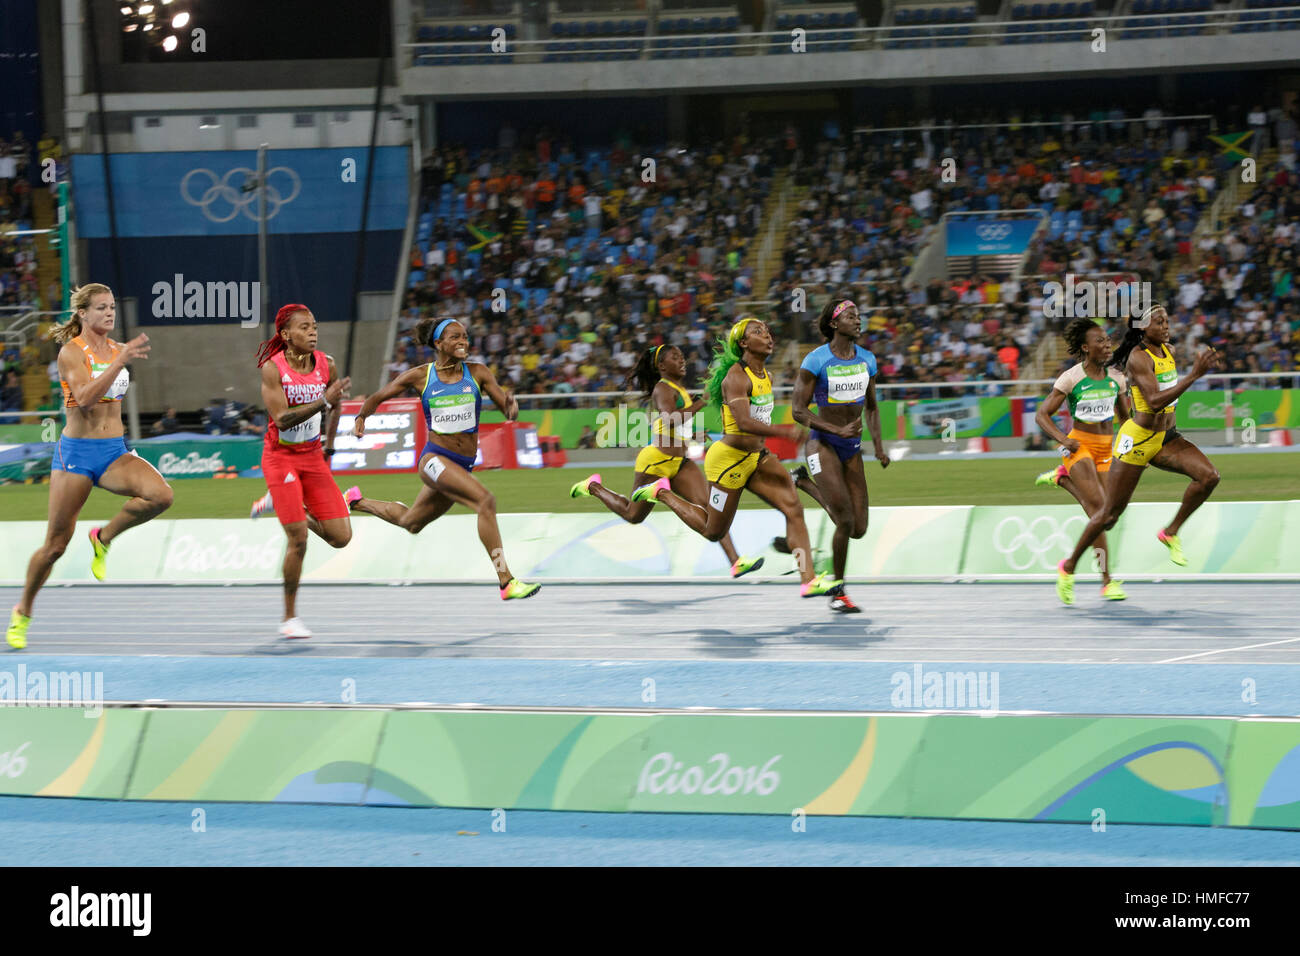 Rio de Janeiro, Brazil. 13 August 2016 .Elaine Thiompson (JAM) leads the field on her way to winning the gold medal in the Women's 100m at the 2016 Ol Stock Photo